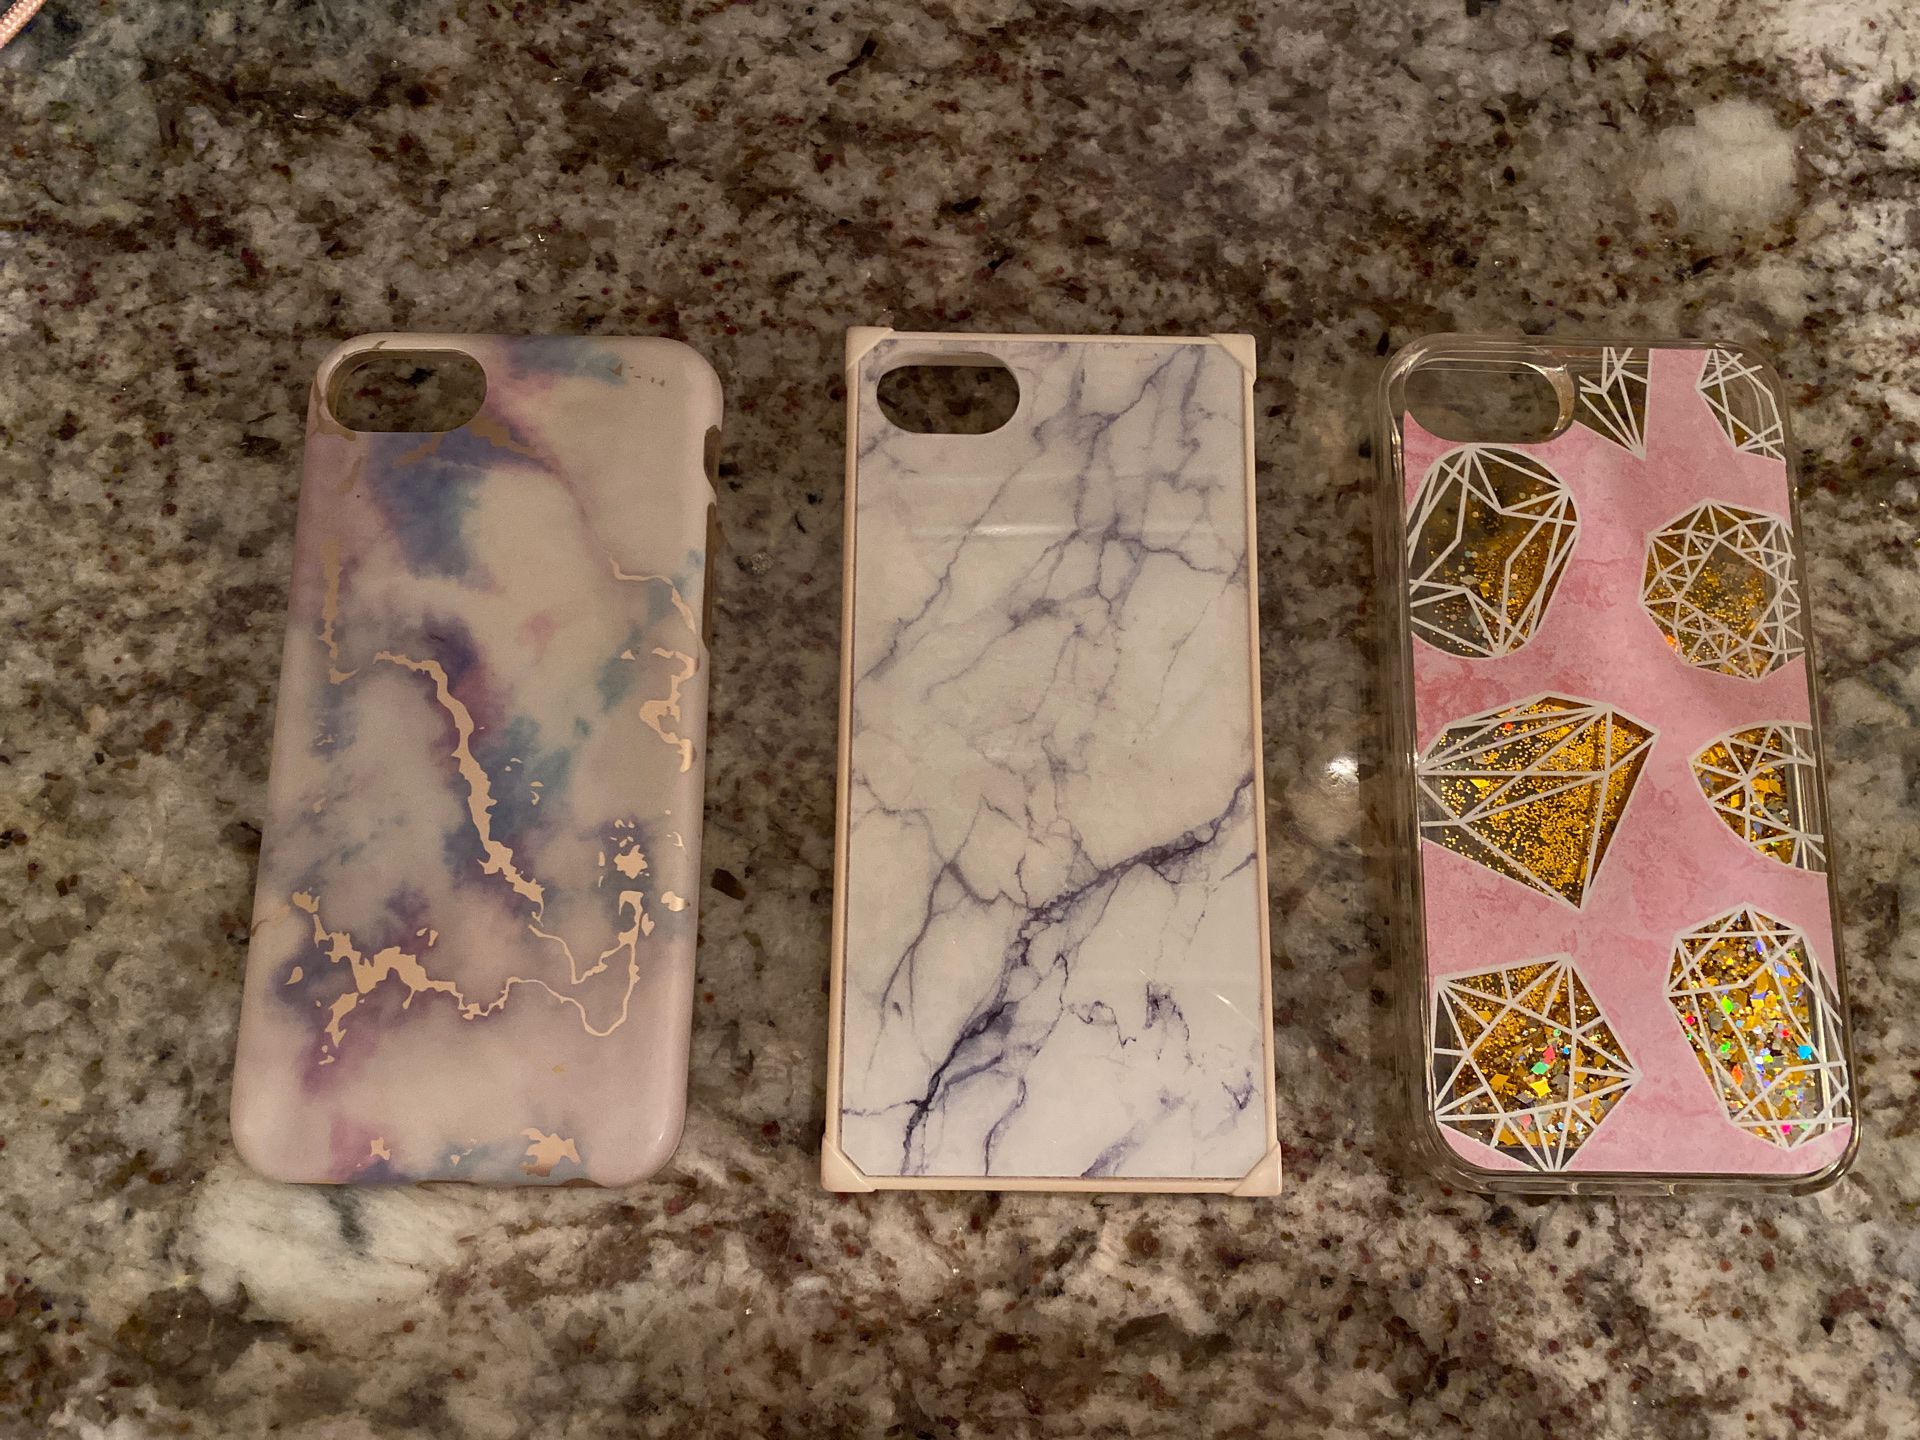 3 iphone 6,6s,7, and 8 cases